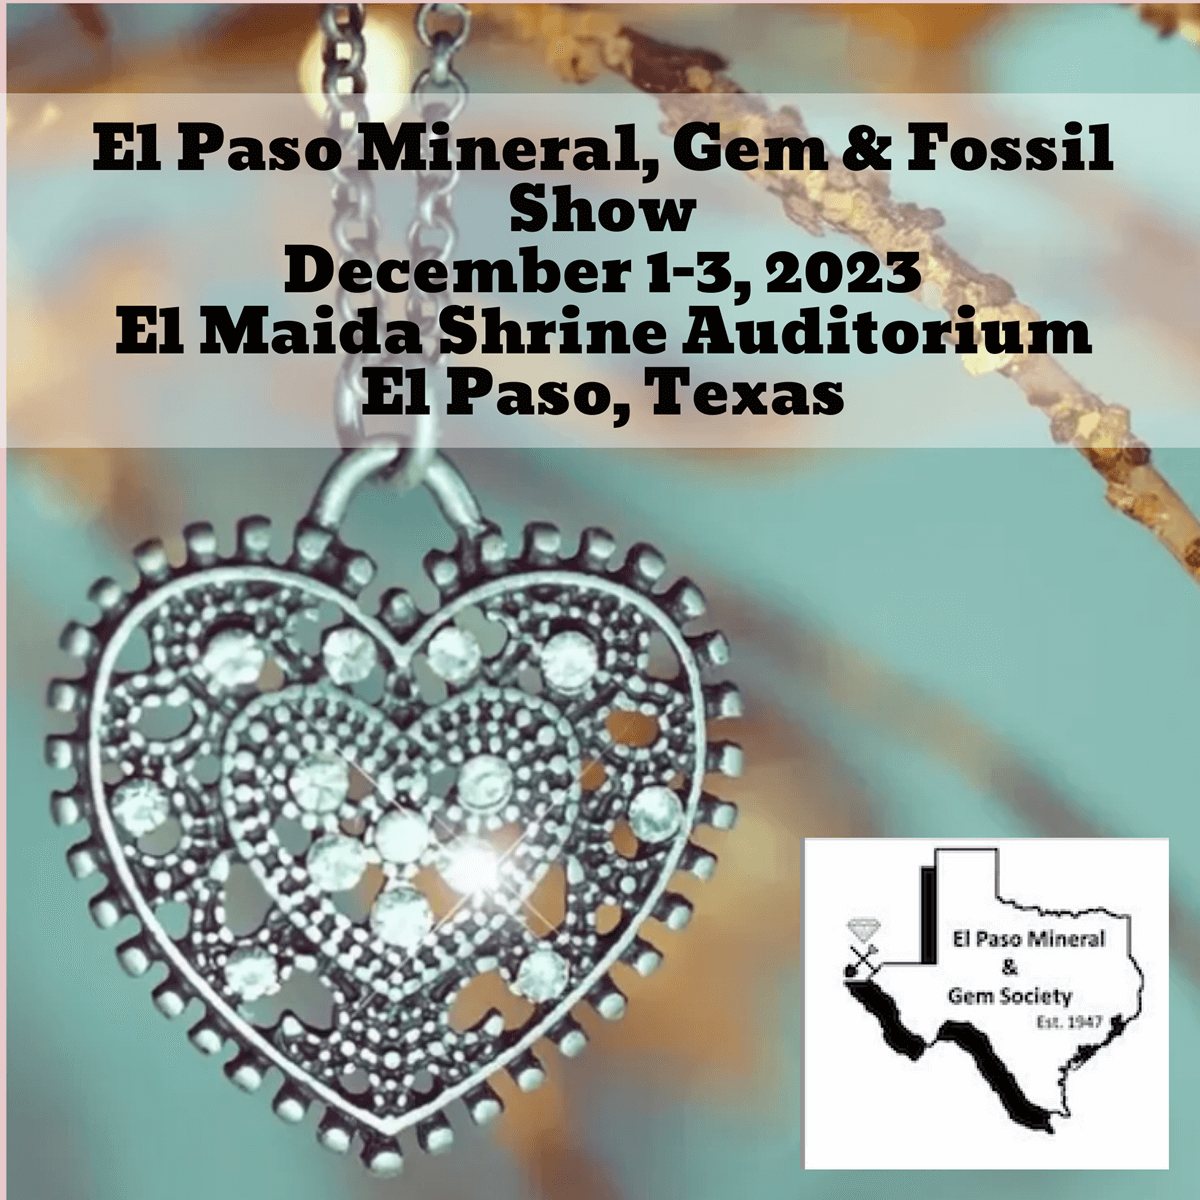 El Paso Mineral and Gem Society Mineral, Gem & Fossil Show 2023